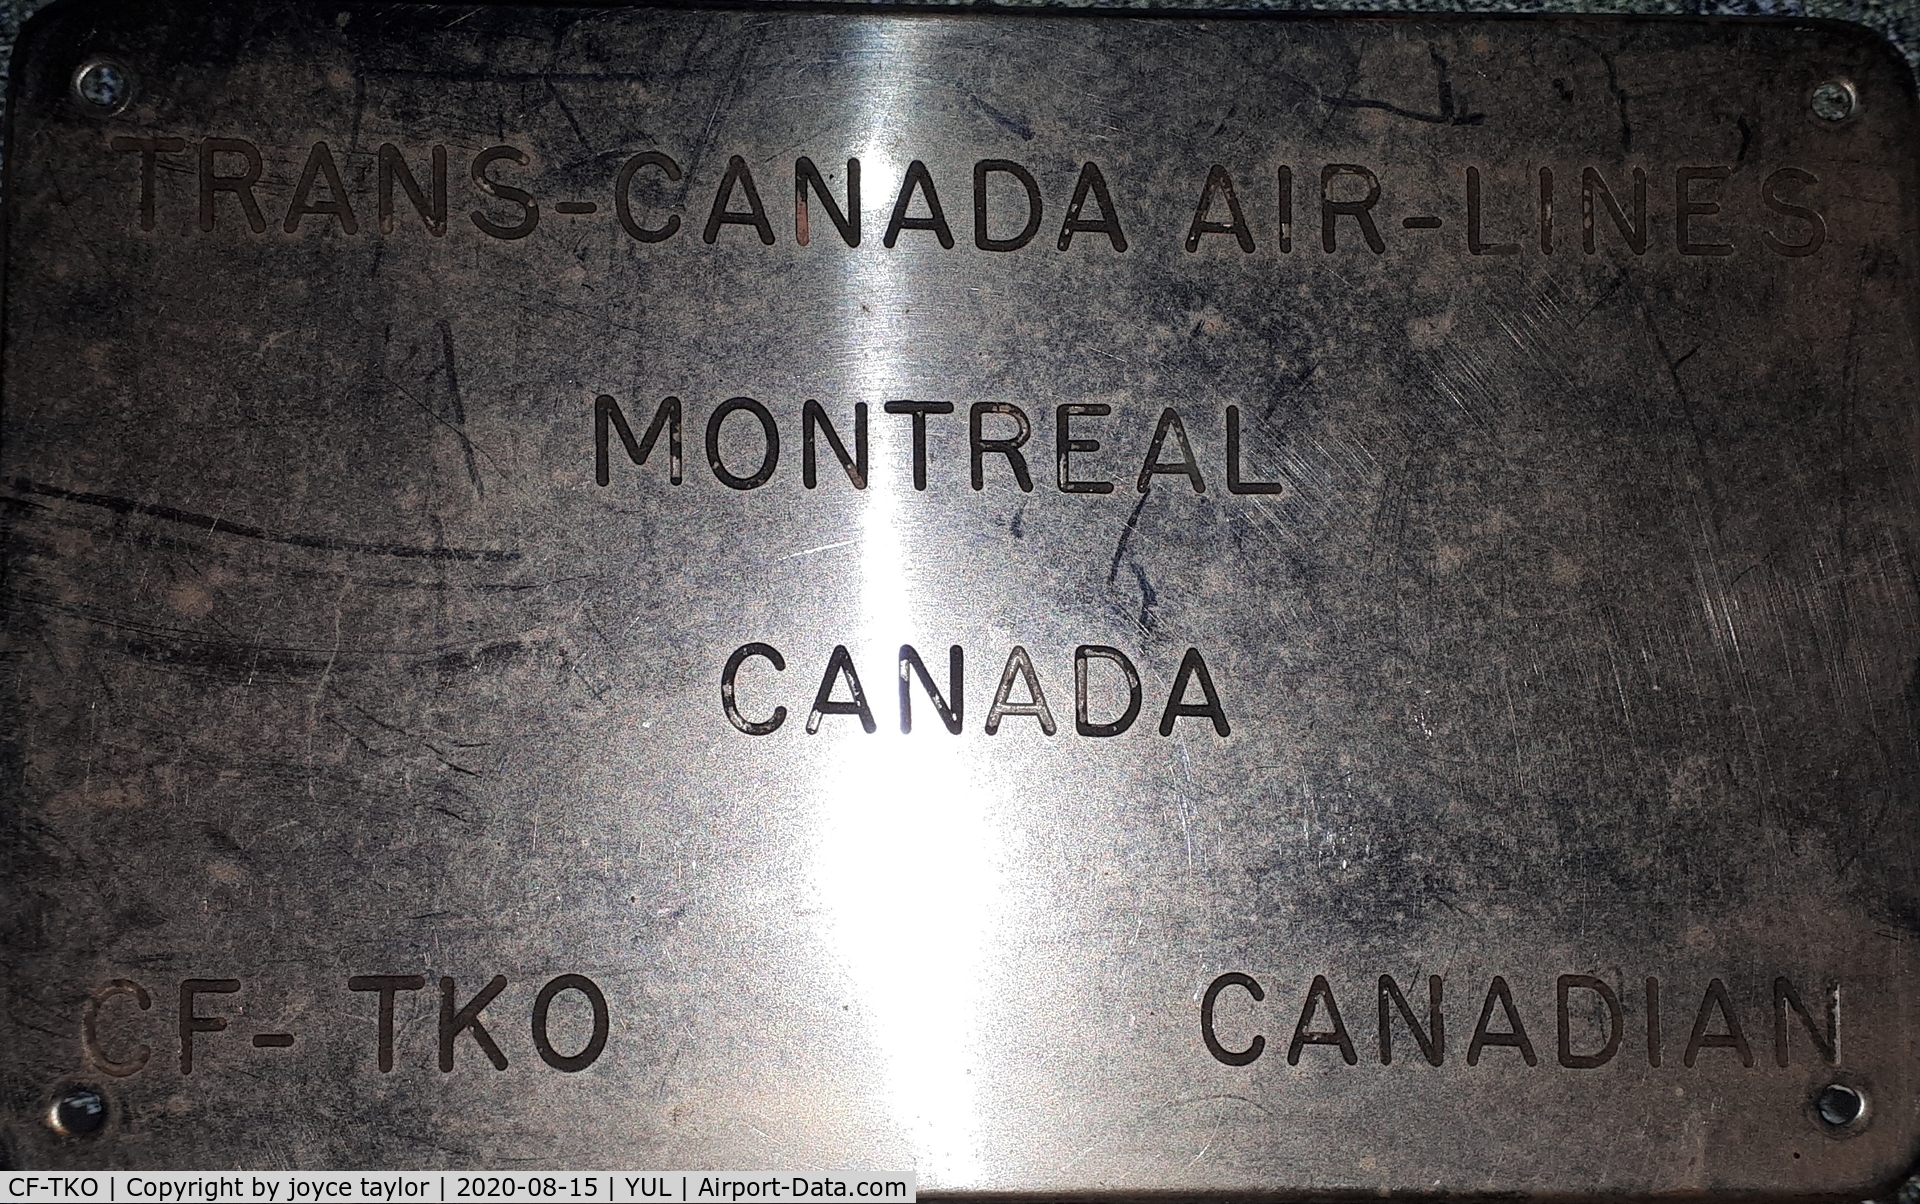 CF-TKO, 1961 Vickers Vanguard 952 C/N 738, My Dad retired from Air Canada in 1972. This was in his memorobilia.